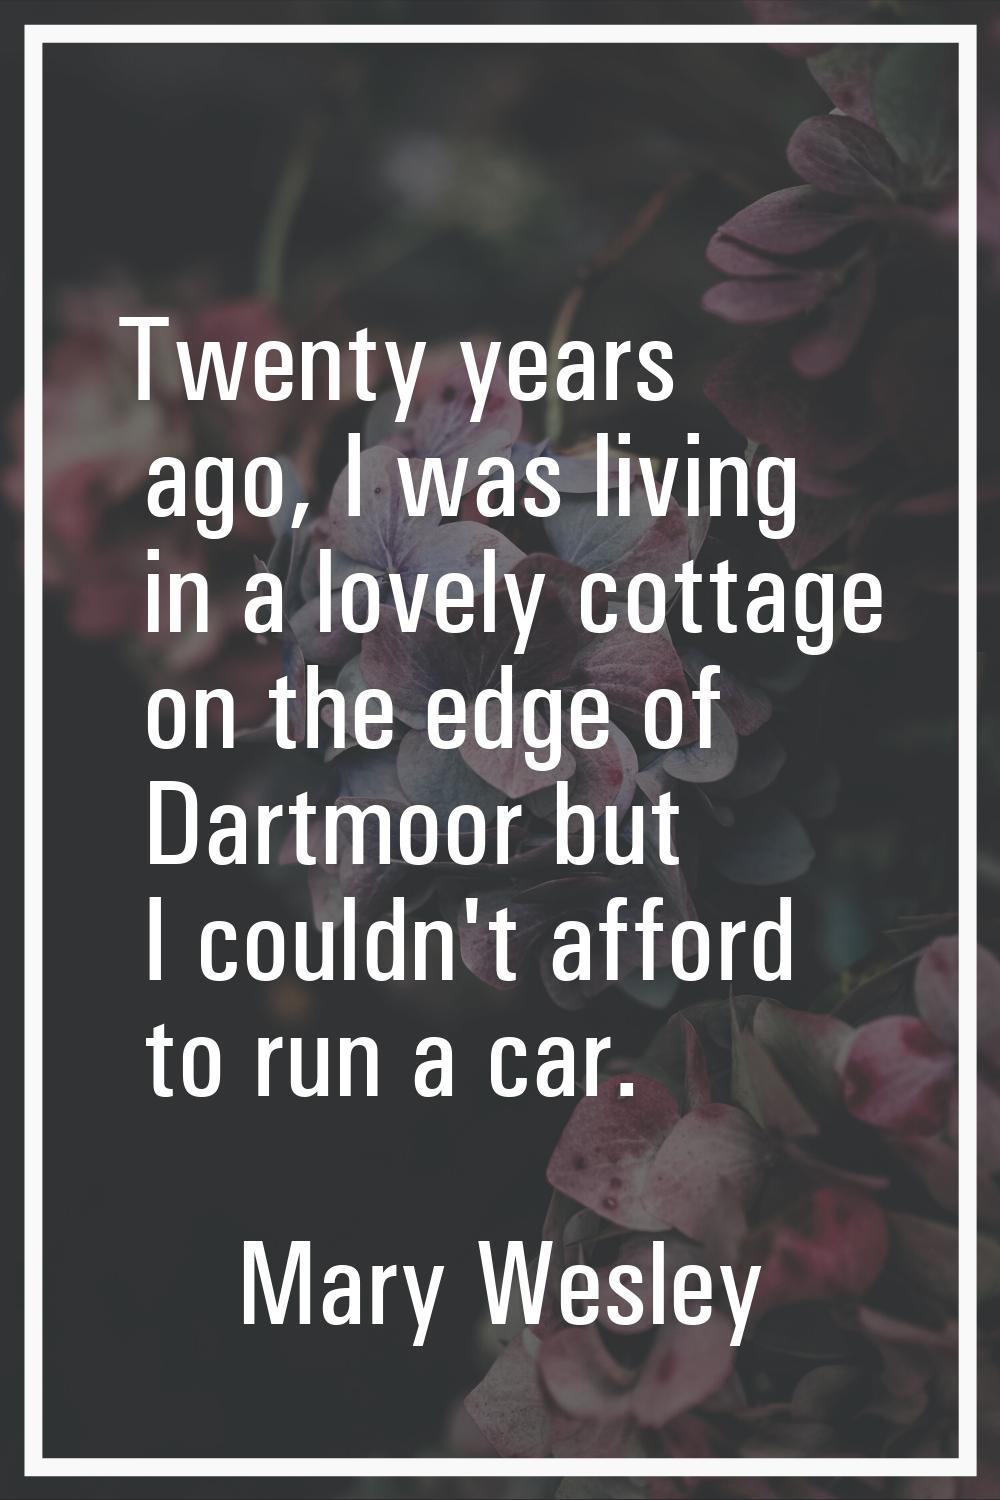 Twenty years ago, I was living in a lovely cottage on the edge of Dartmoor but I couldn't afford to